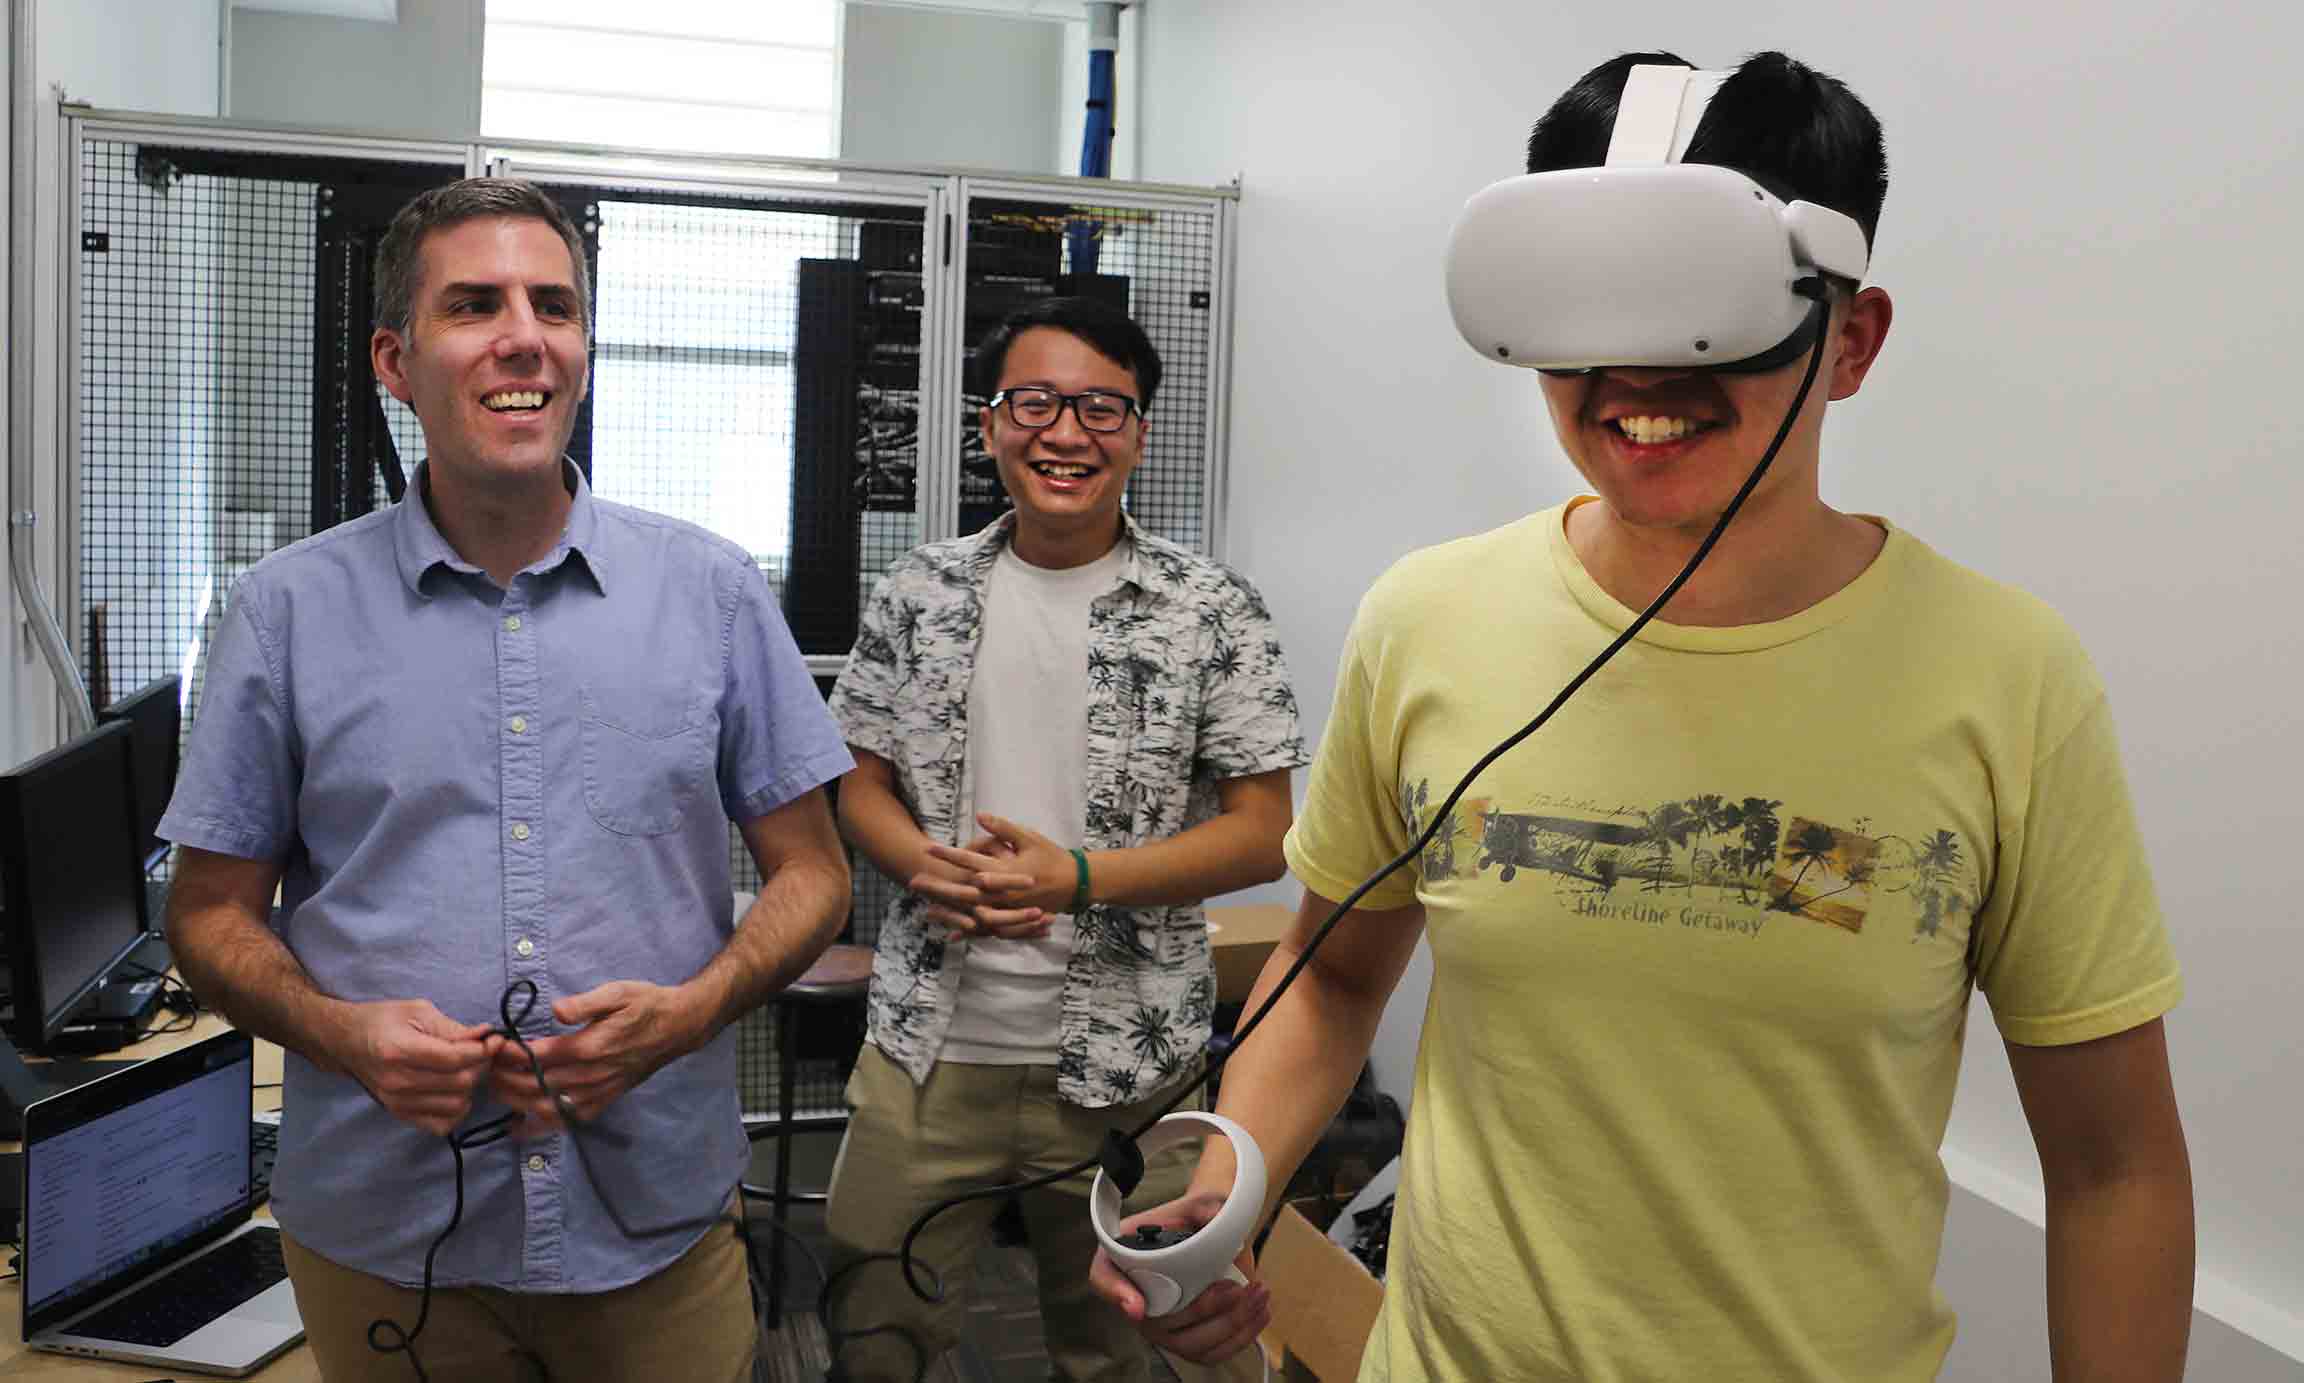 A professor and a student look on as another student wears a VR headset.